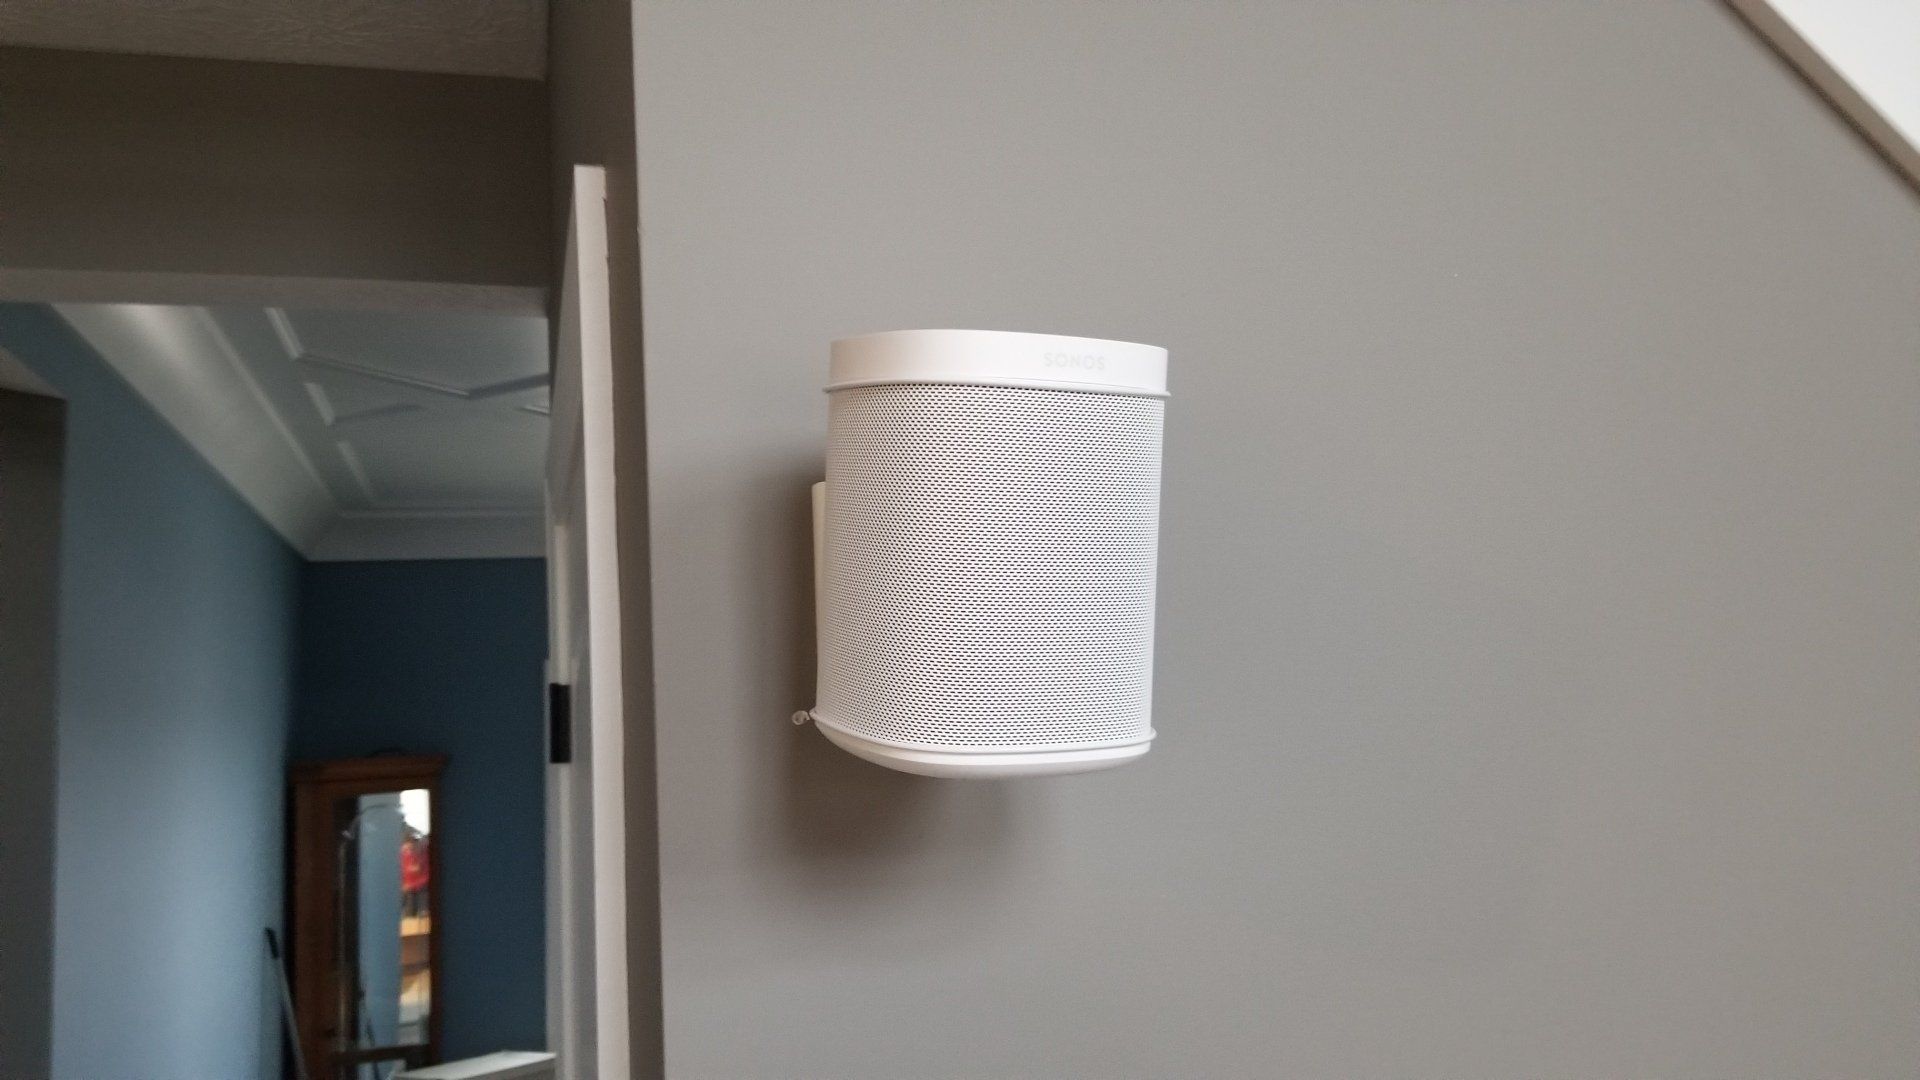 a white sonos rear speaker mounted on a gray wall installed by fisher electronics in northern ohio.